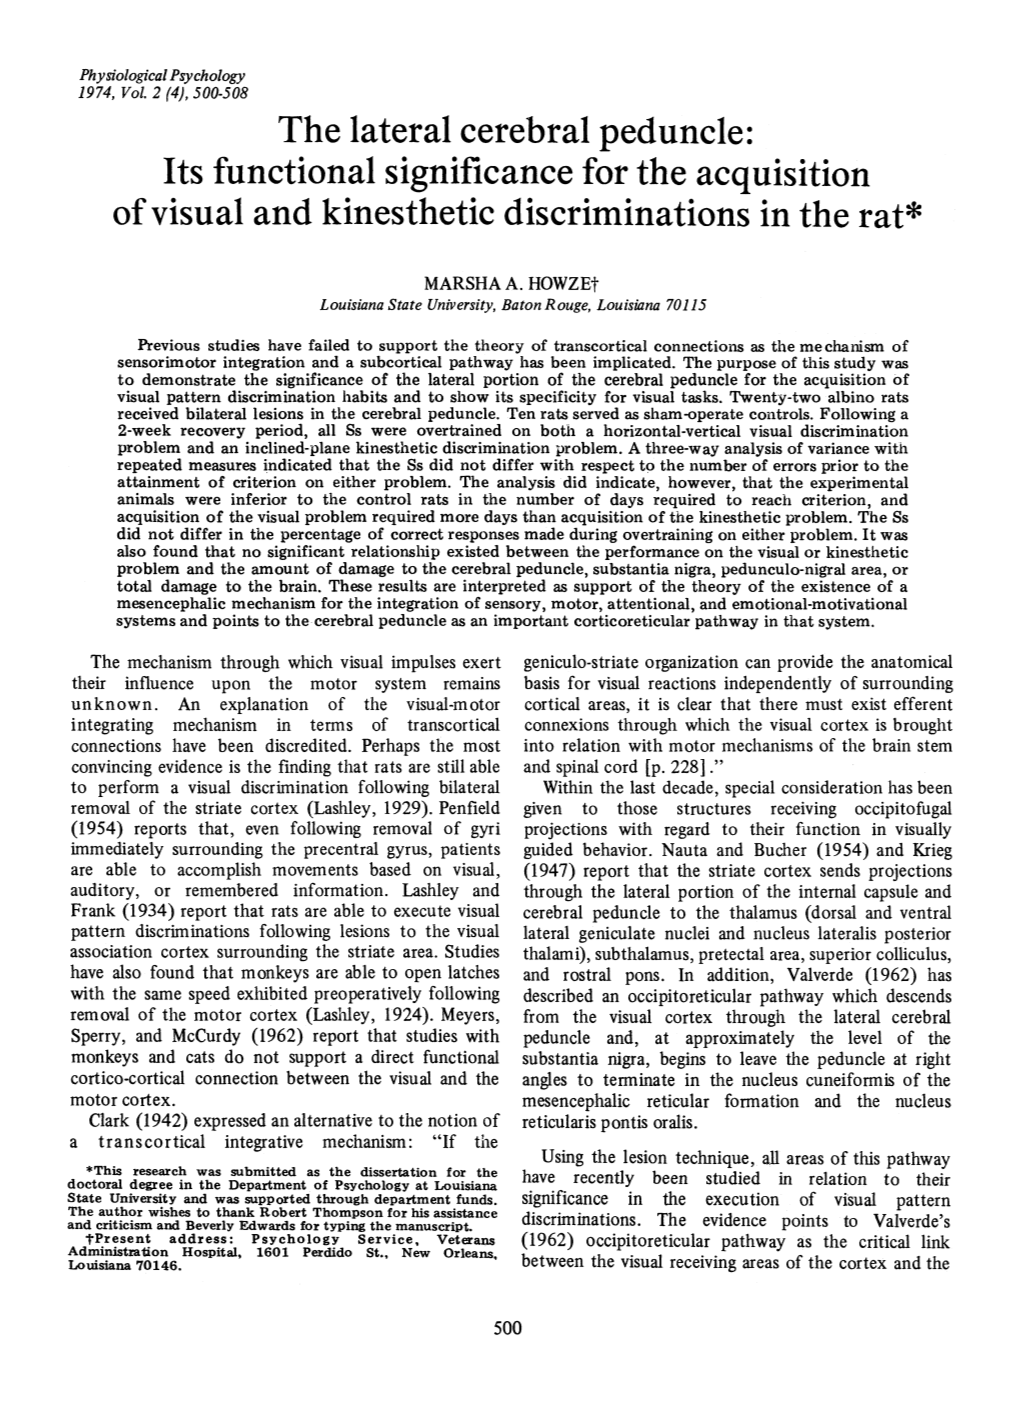 The Lateral Cerebral Peduncle: Its Functional Significance for the Acquisition Ofvisual and Kinesthetic Discriminations in the Rat*